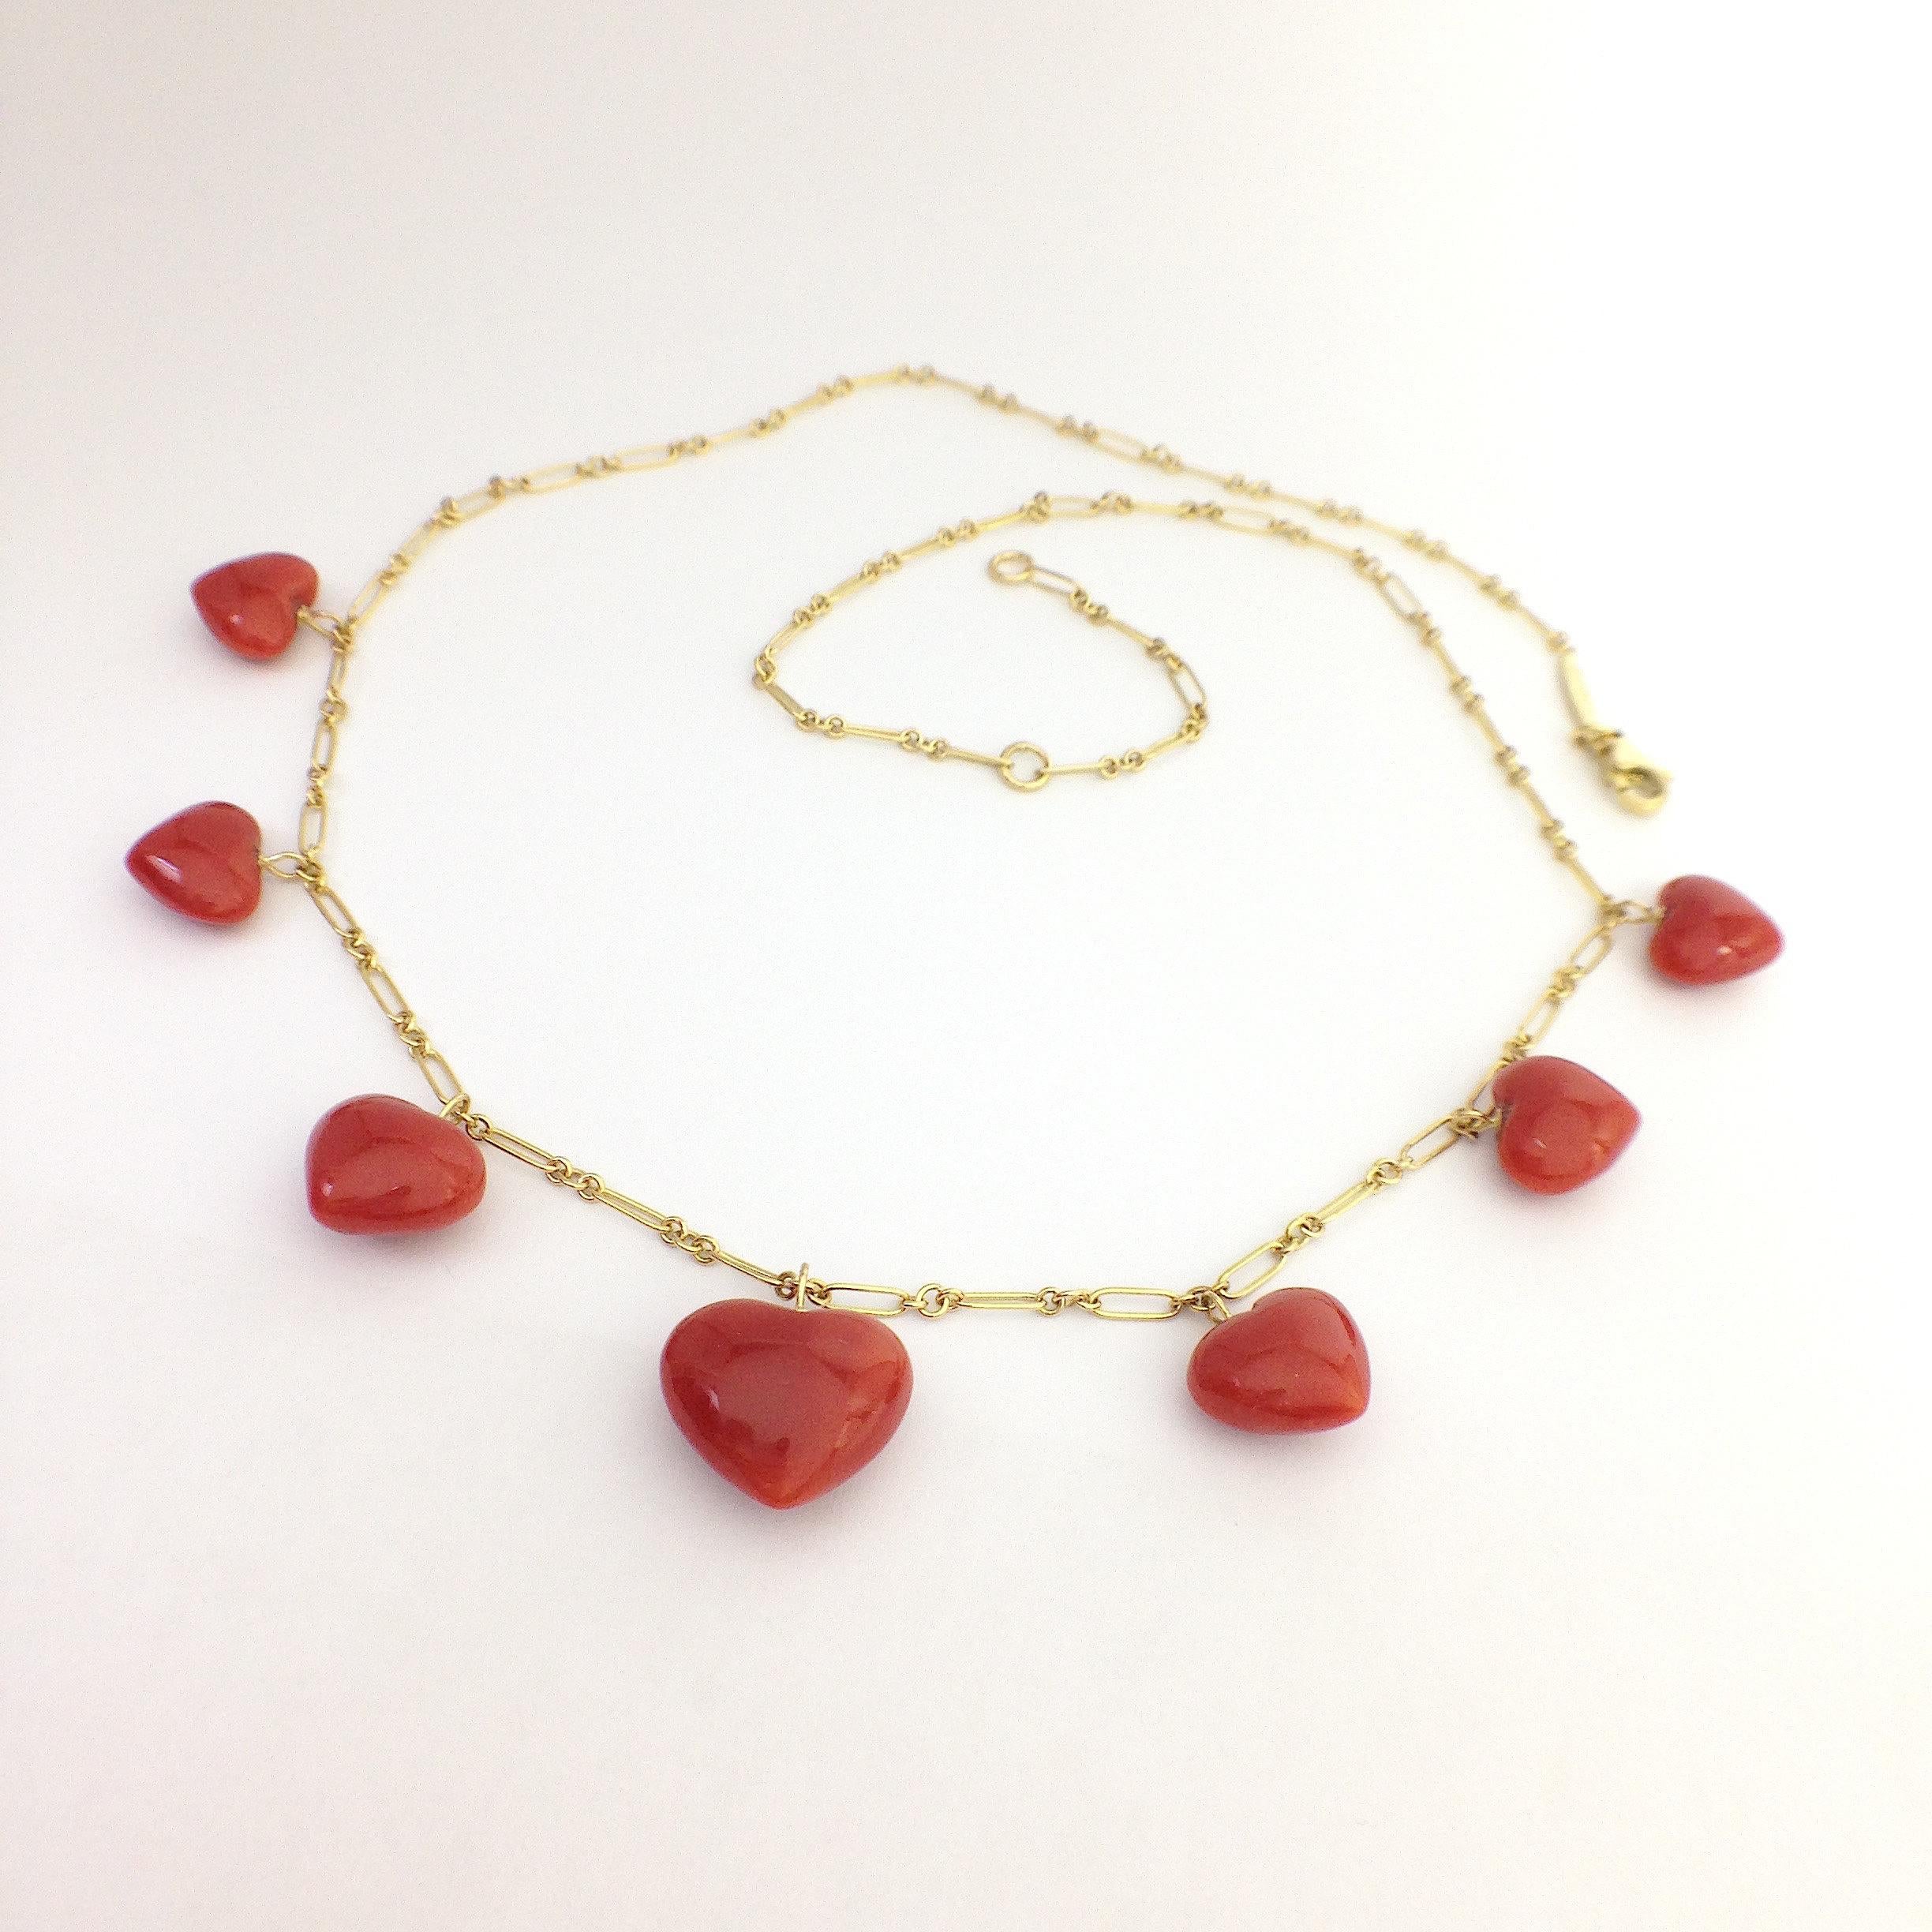 Italian Natural Red Coral Heart Necklace Handmade 18 Karat Gold made in Italy
This is a necklace completely handmade in yellow 18Kt gold.
It has 7 red coral hearts positioned from smaller to larger towards the center of the necklace.
It is 43 cm or